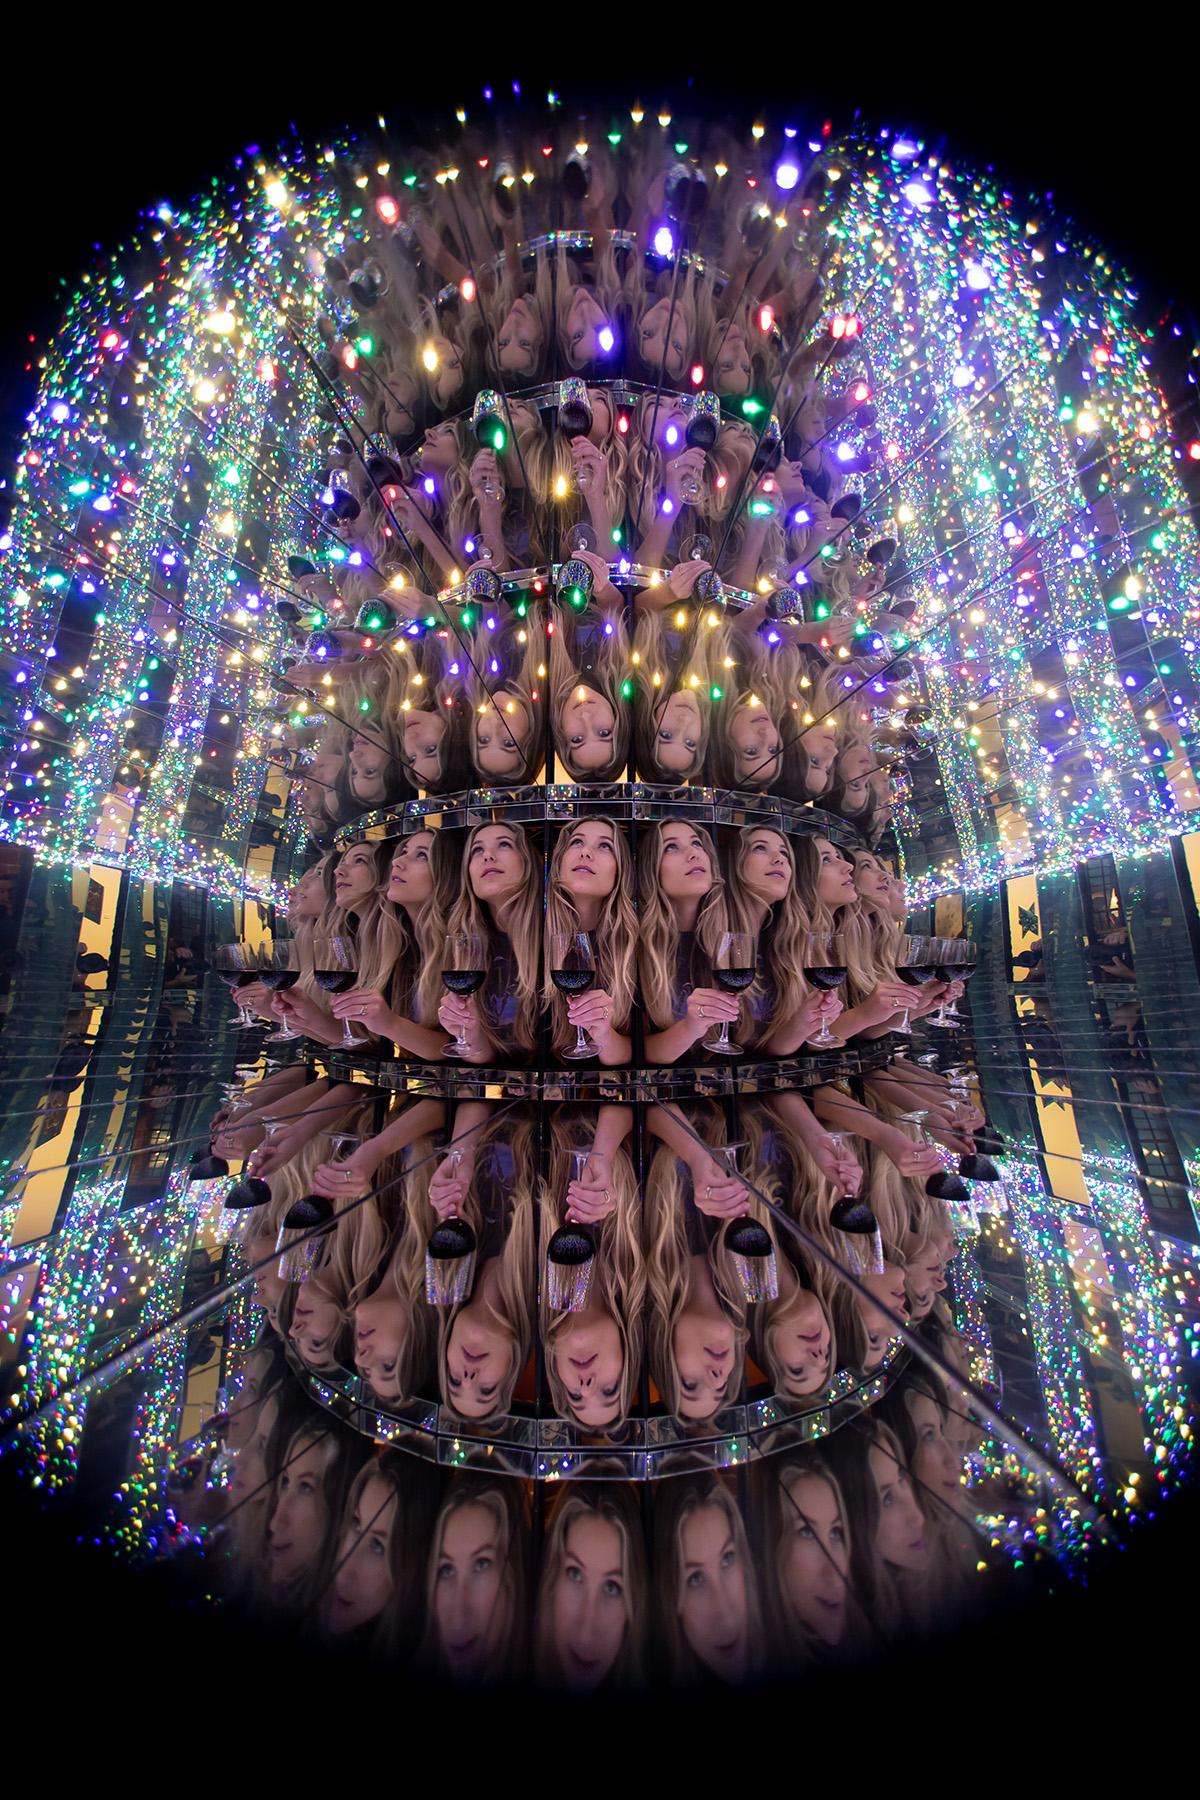 Sparks Gallery In Wonderland Infinity Mirror Image Credit @createwithgusto